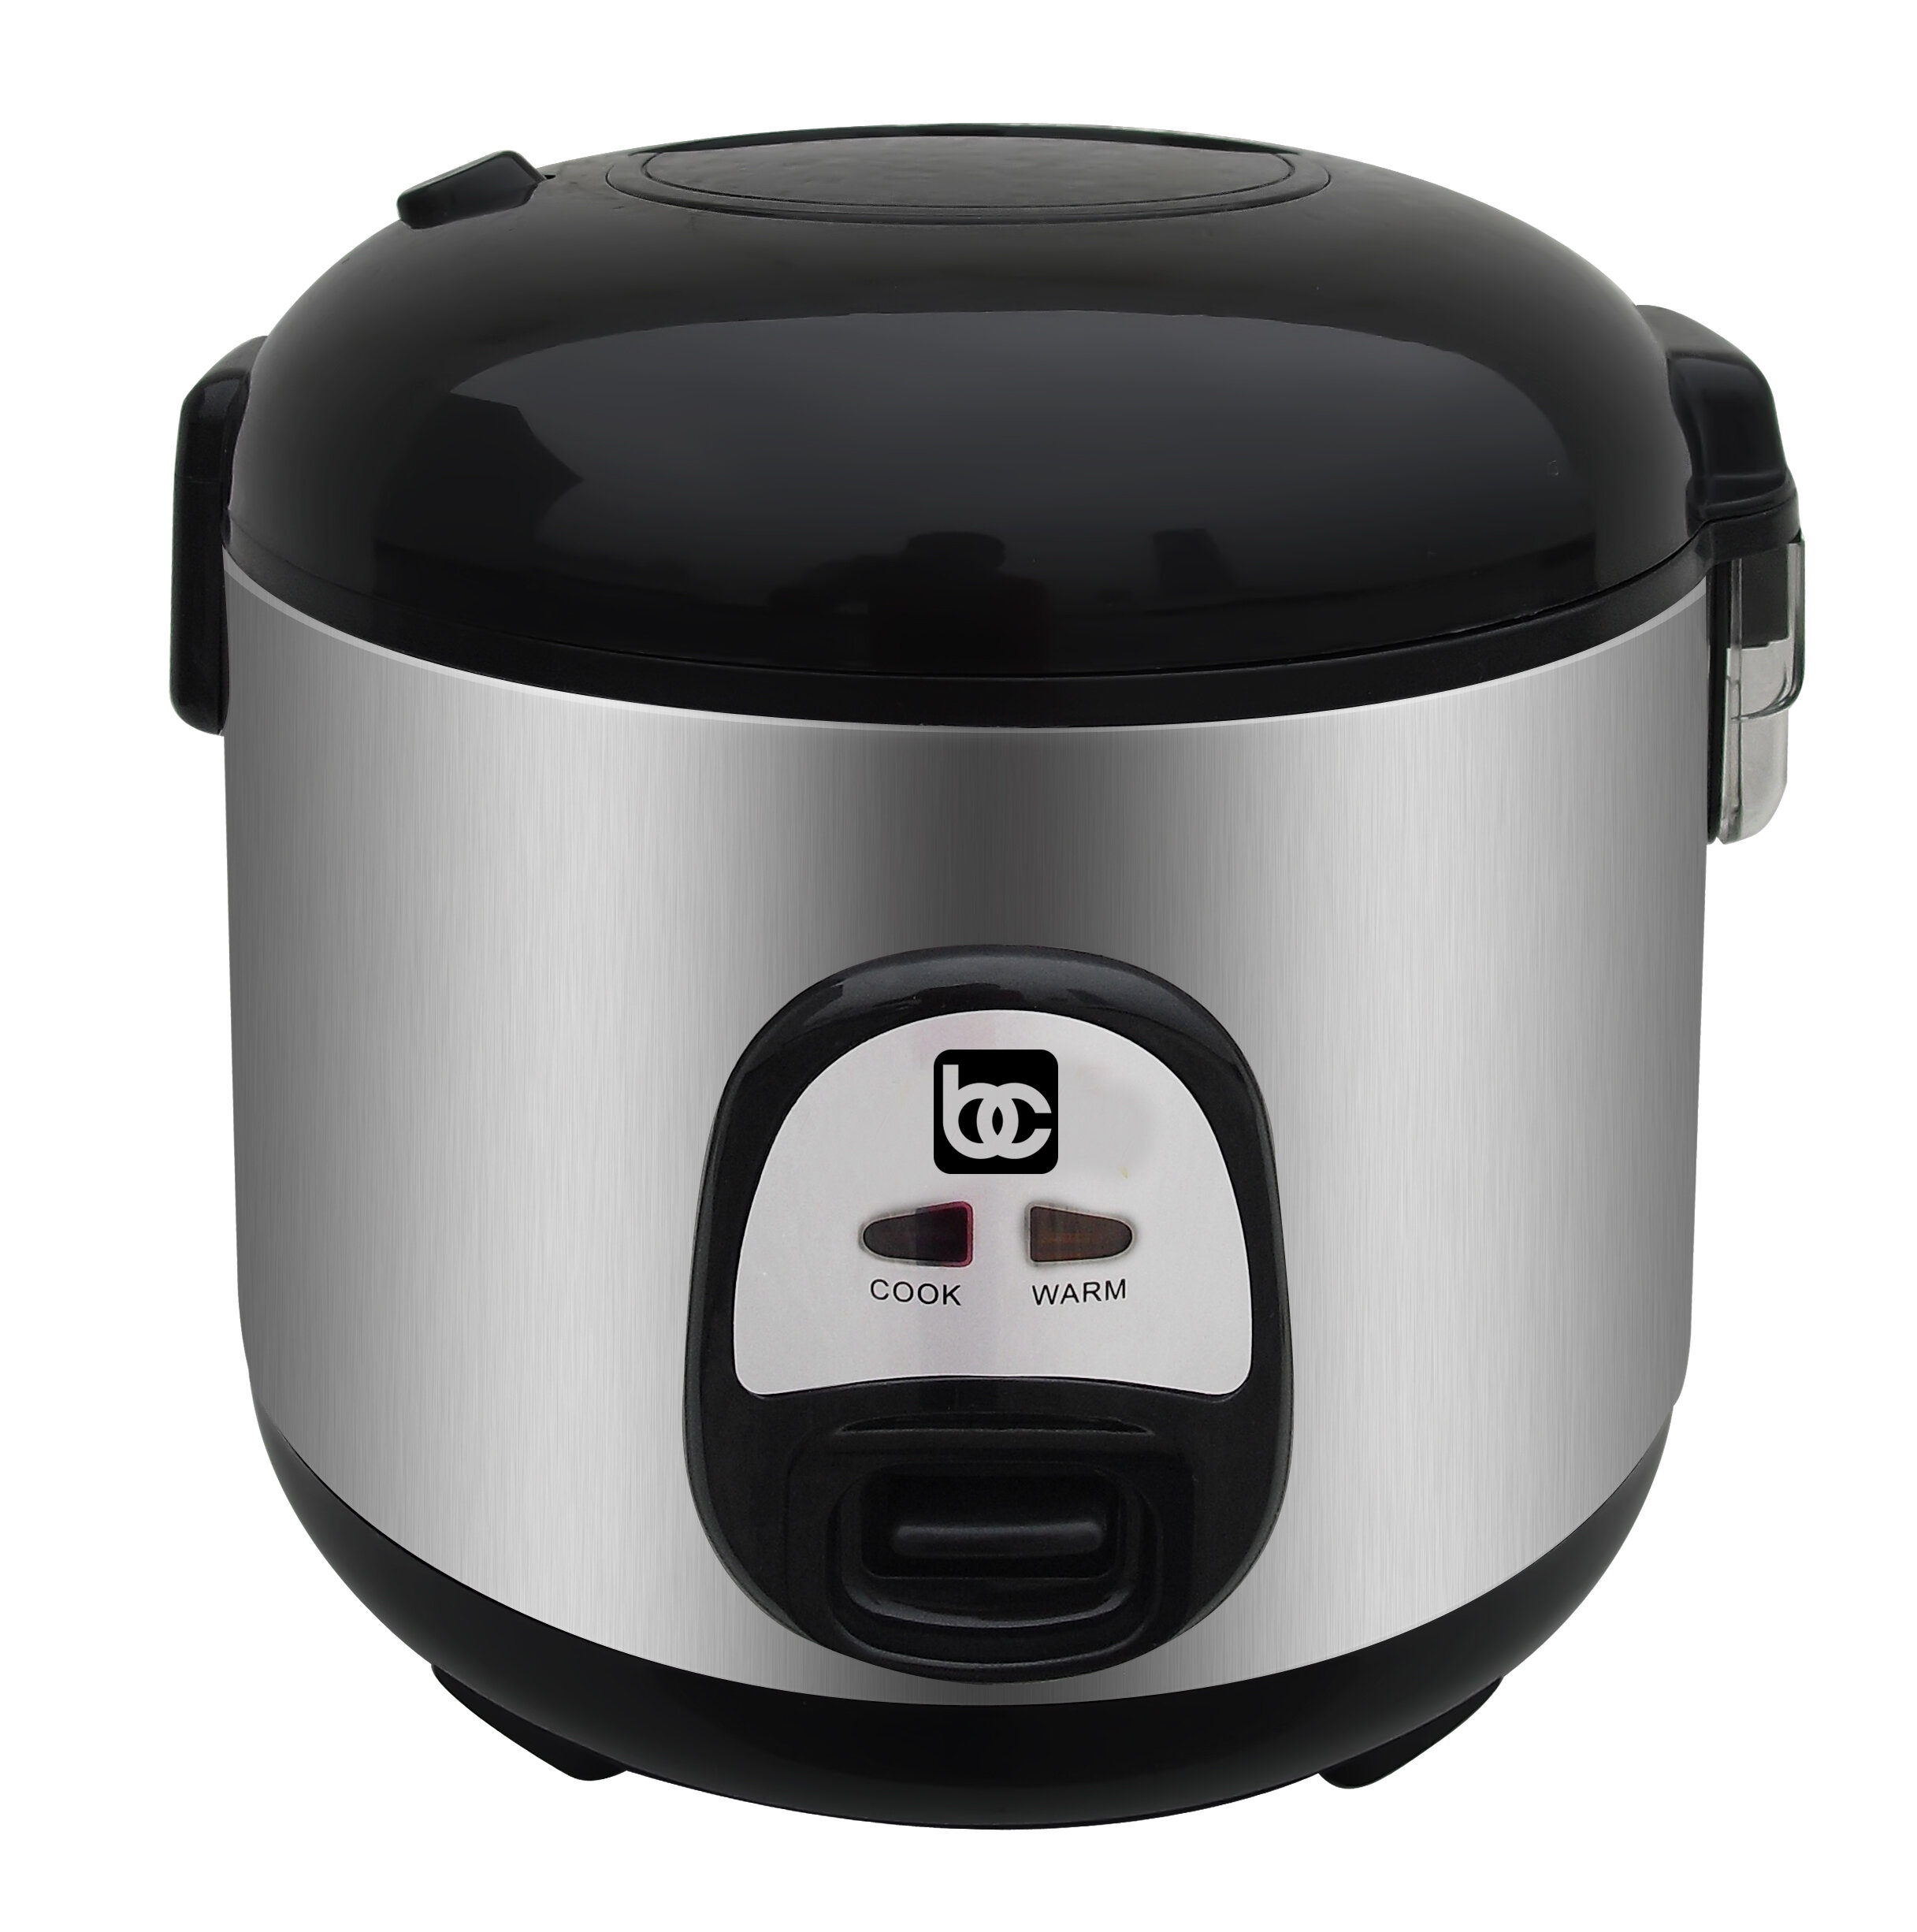 Aroma 14-Cup Simply Stainless Rice Cooker